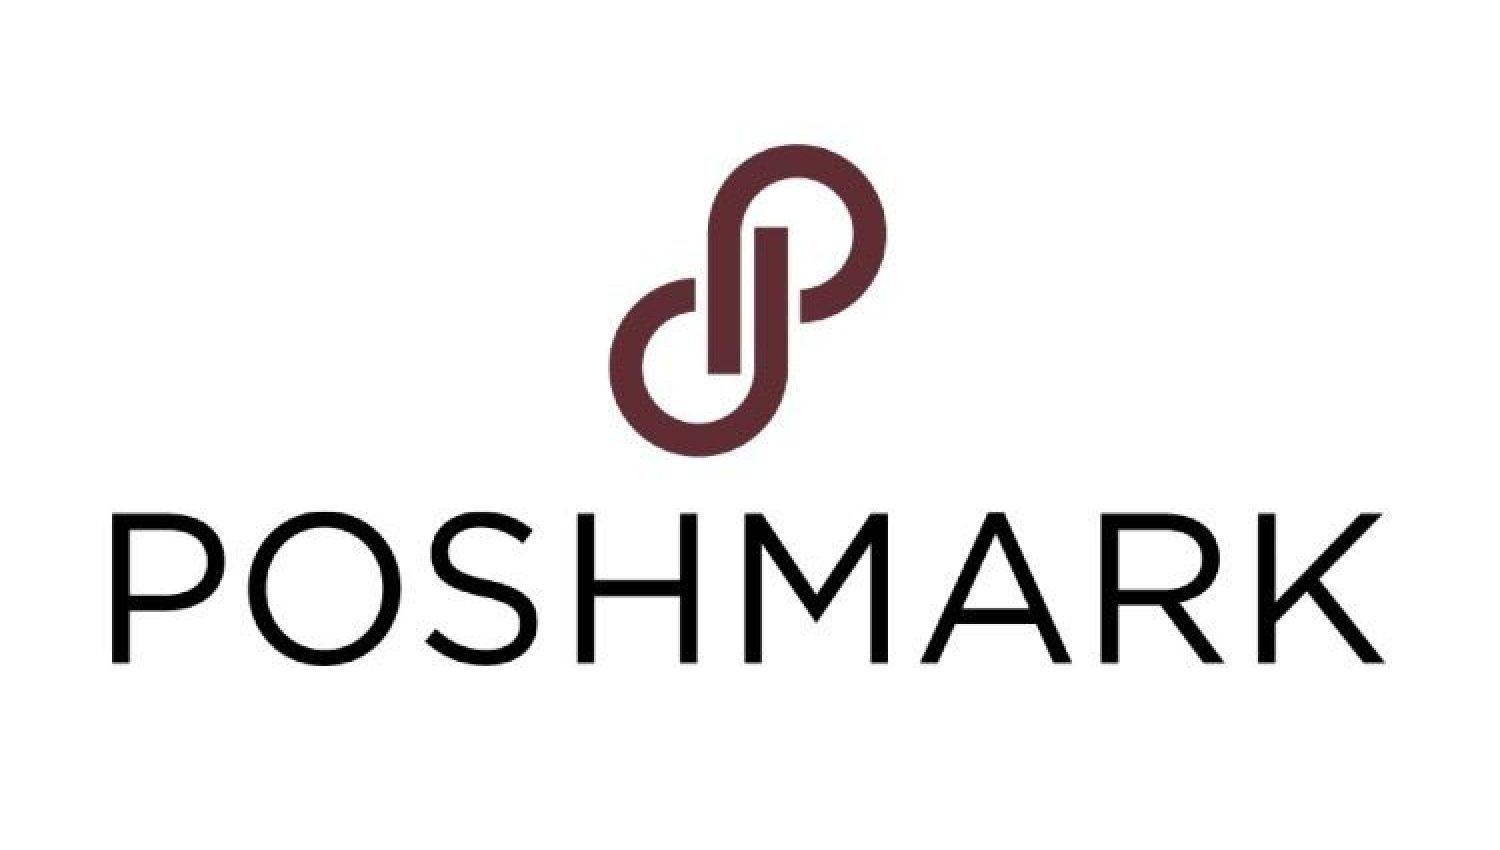 Poshmark Logo - How I Earned $11,000 By Cleaning Out My Closet | Thrive Lifestyle